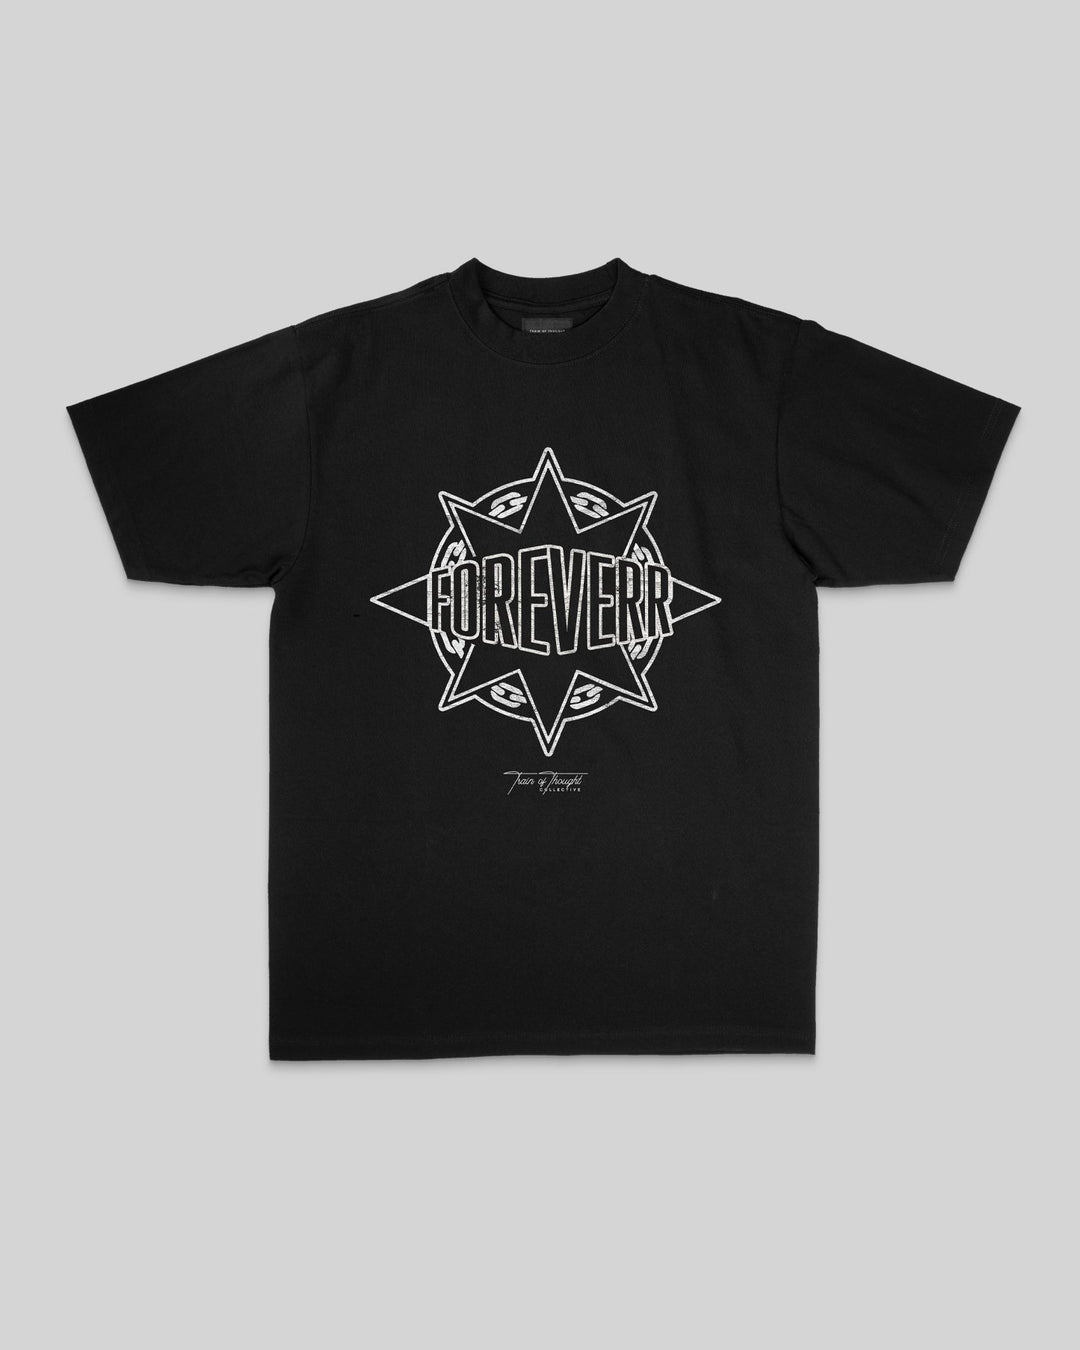 Foreverr Black Tee - trainofthoughtcollective